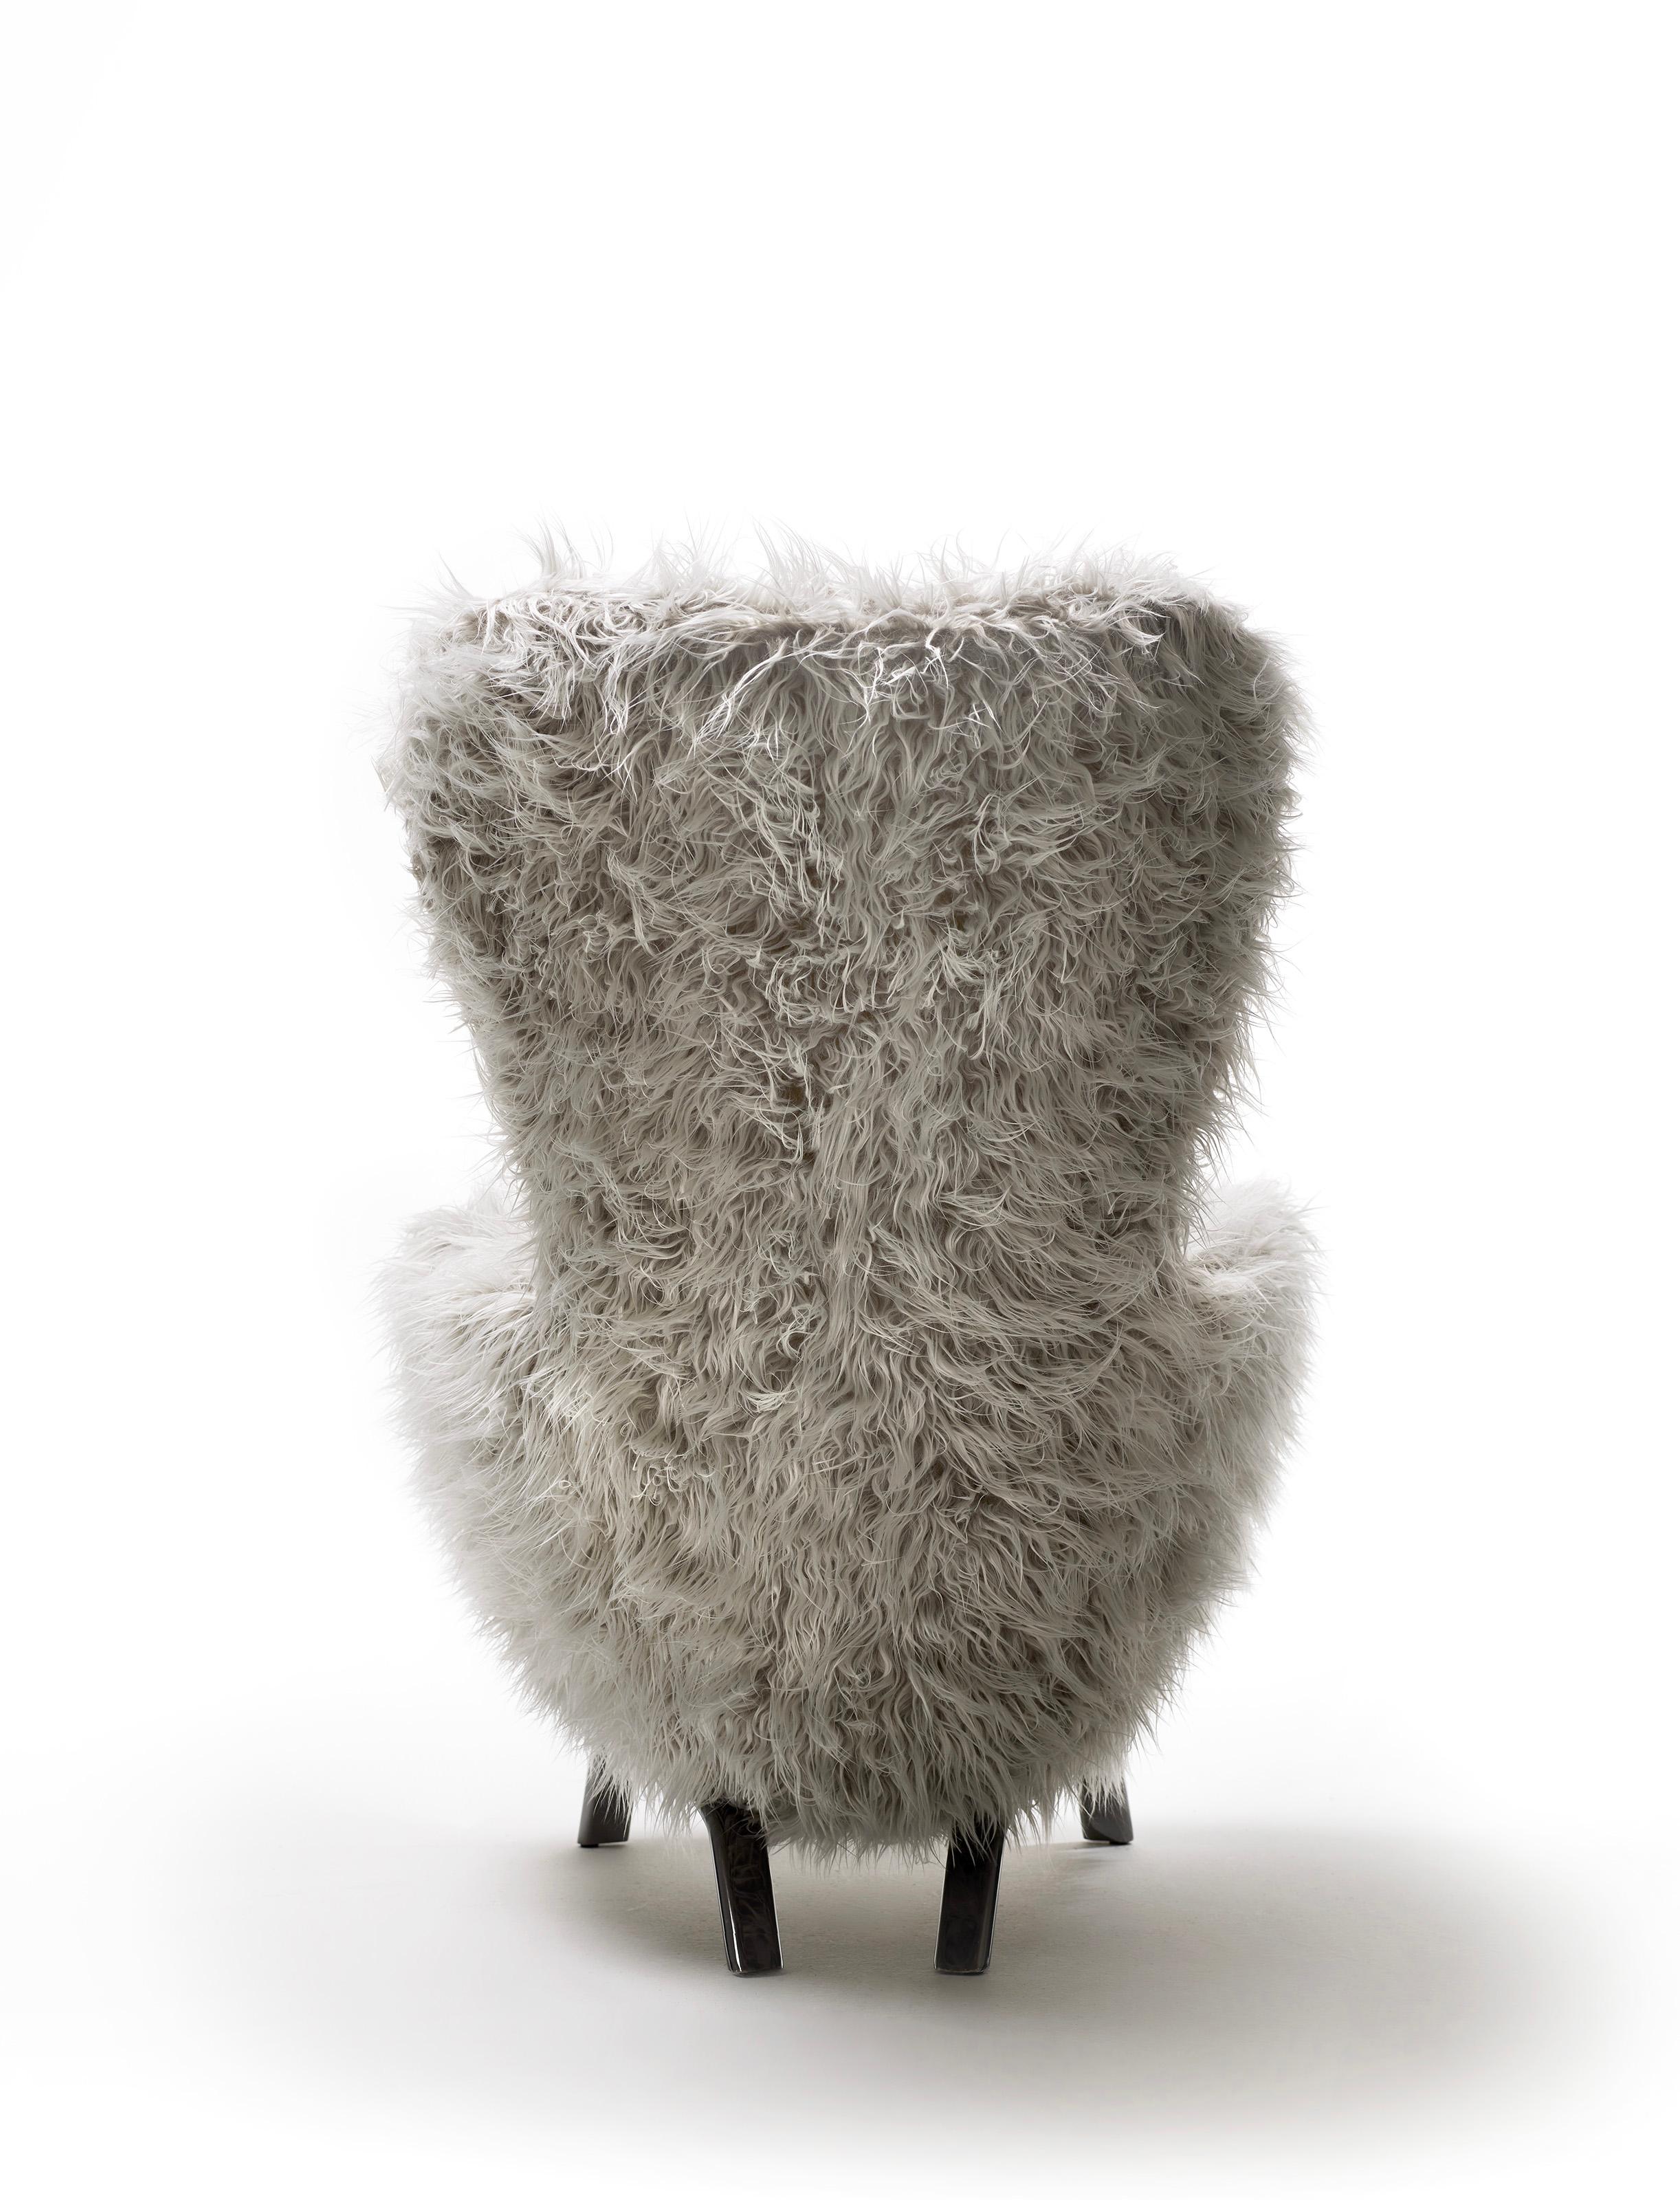 A cozy and comfortable bucket seat, a reassuring form with absolutely contemporary details; these are the main features of the Guelfo collection designed by Lapo Ciatti.

Guelfo wingback chair and pouf were launched in 2015 with the aim to give a